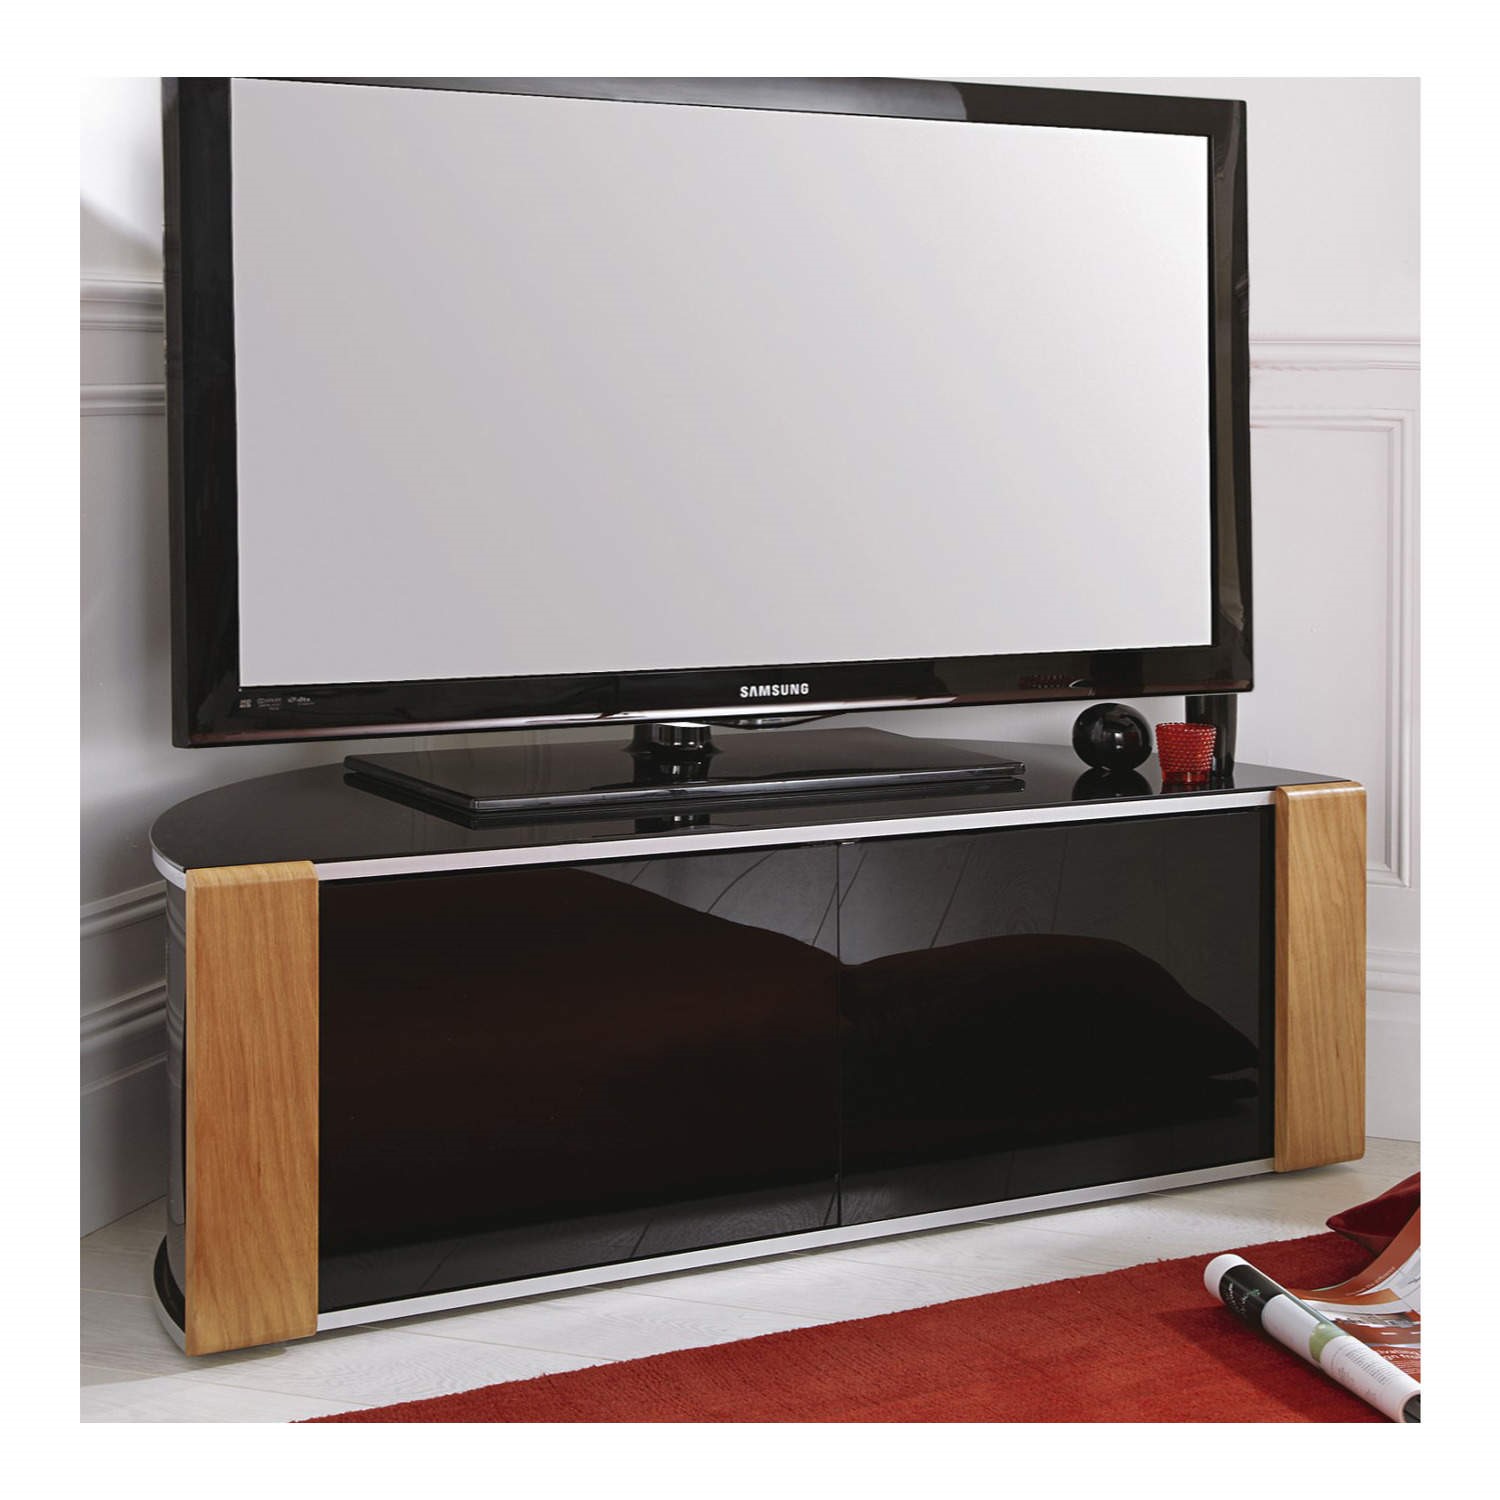 Mda Designs Sirius 1200 Tv Cabinet In Oak Up To 55 Inch Laptops